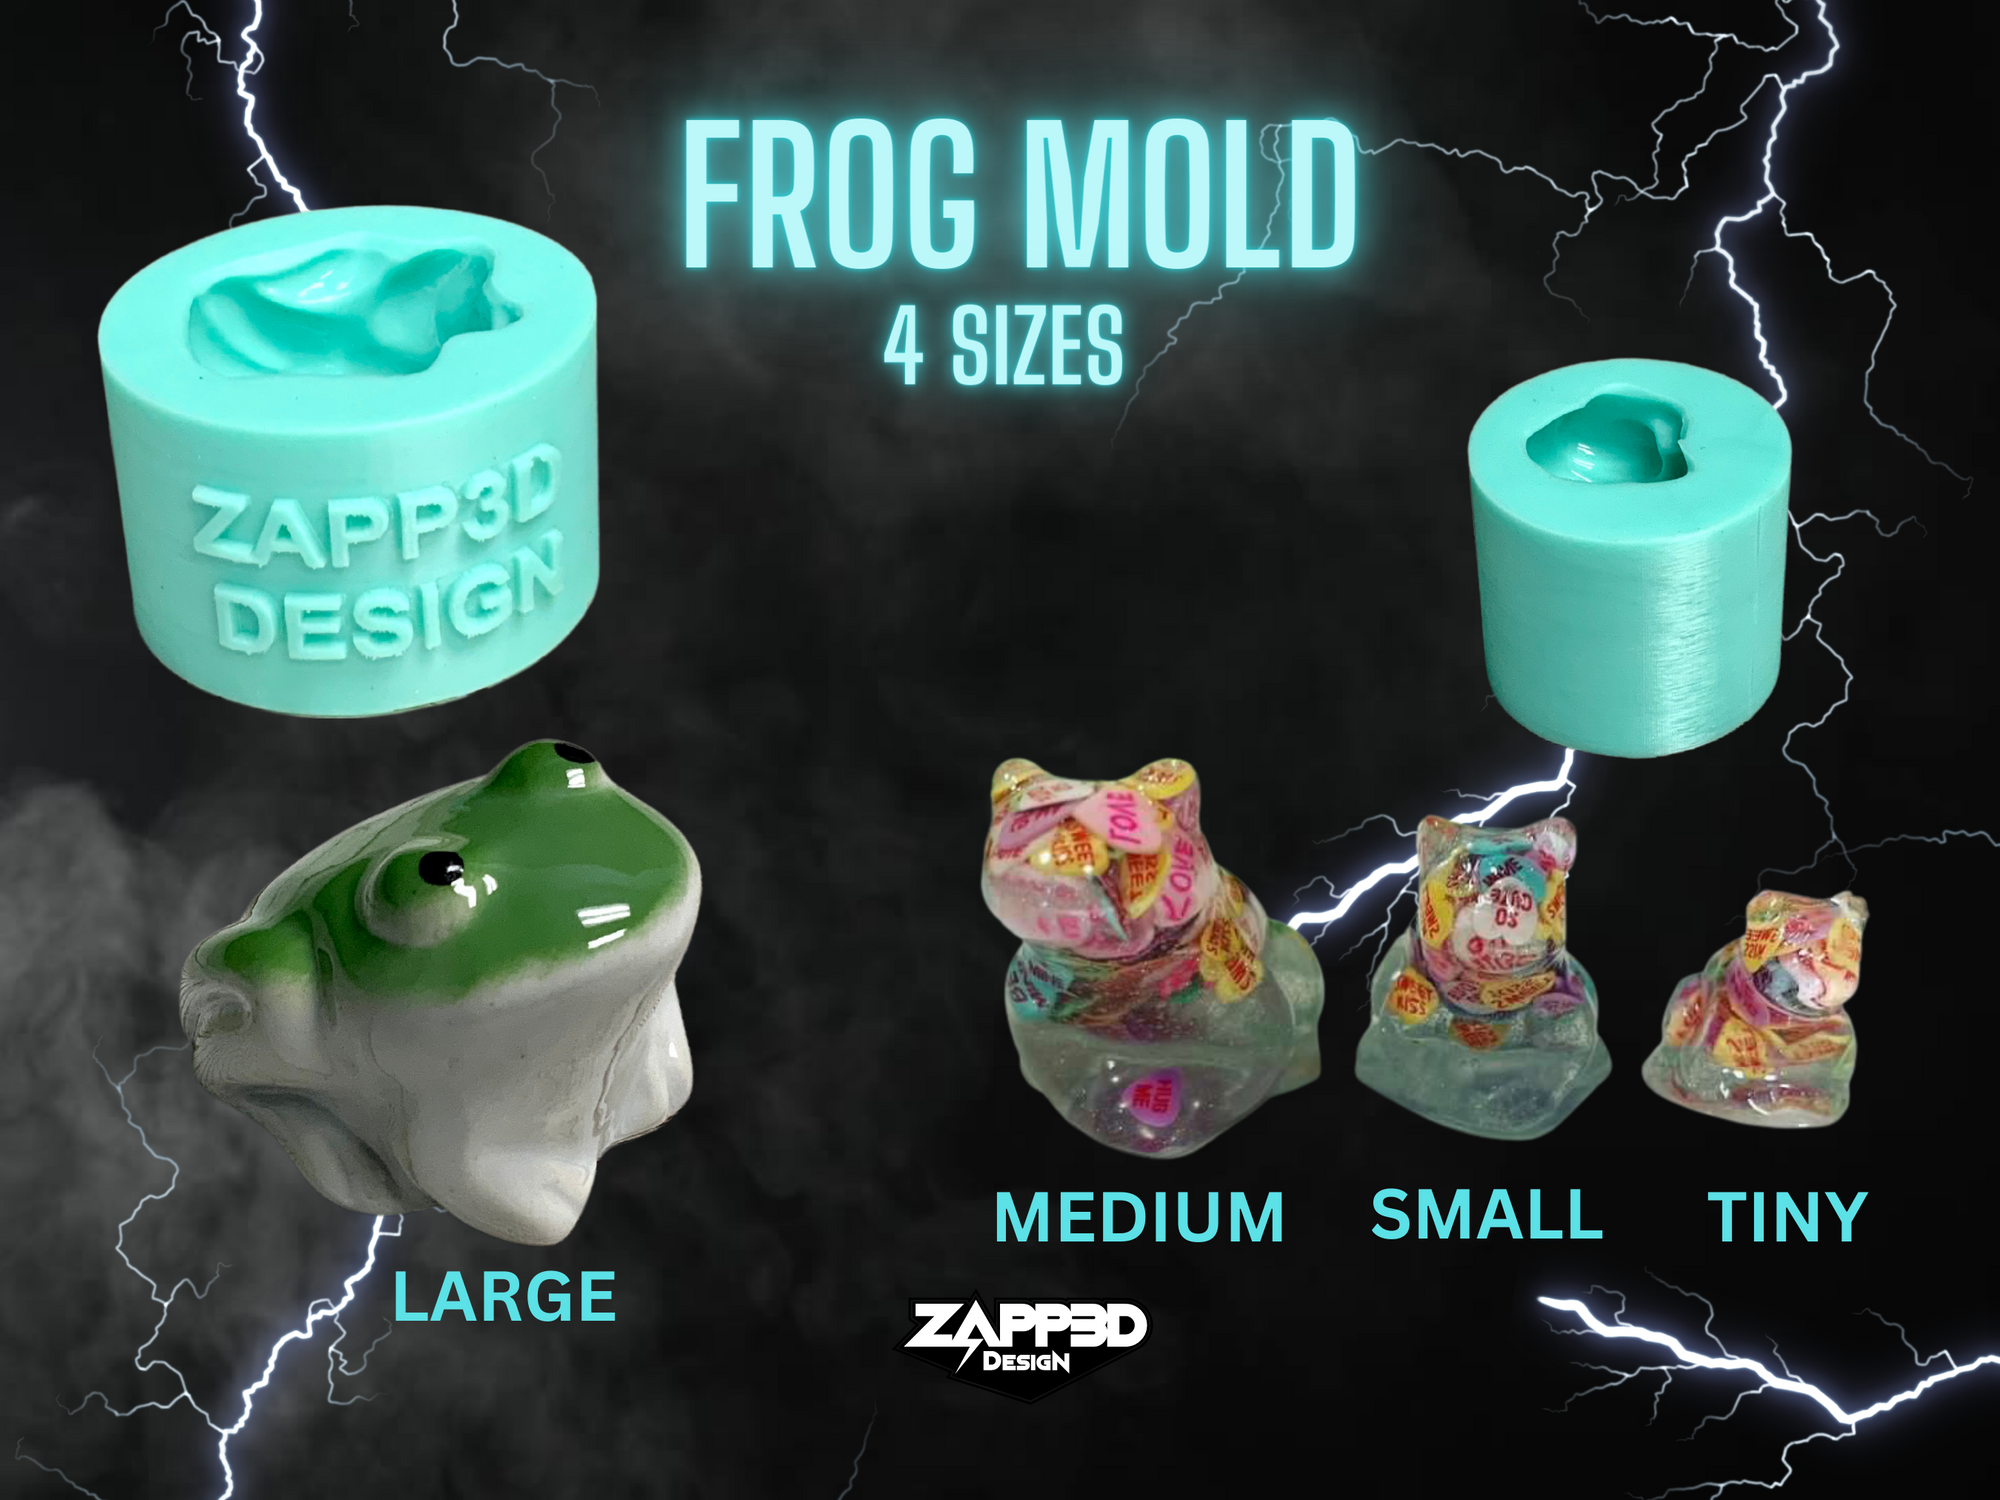 Frog Mold, Frog 3D Mold for Resin, 3D Resin Mold, Frog Mold for Resin, Frog Silicone Mold, Animal Mold, Cute Mold, Small Mold